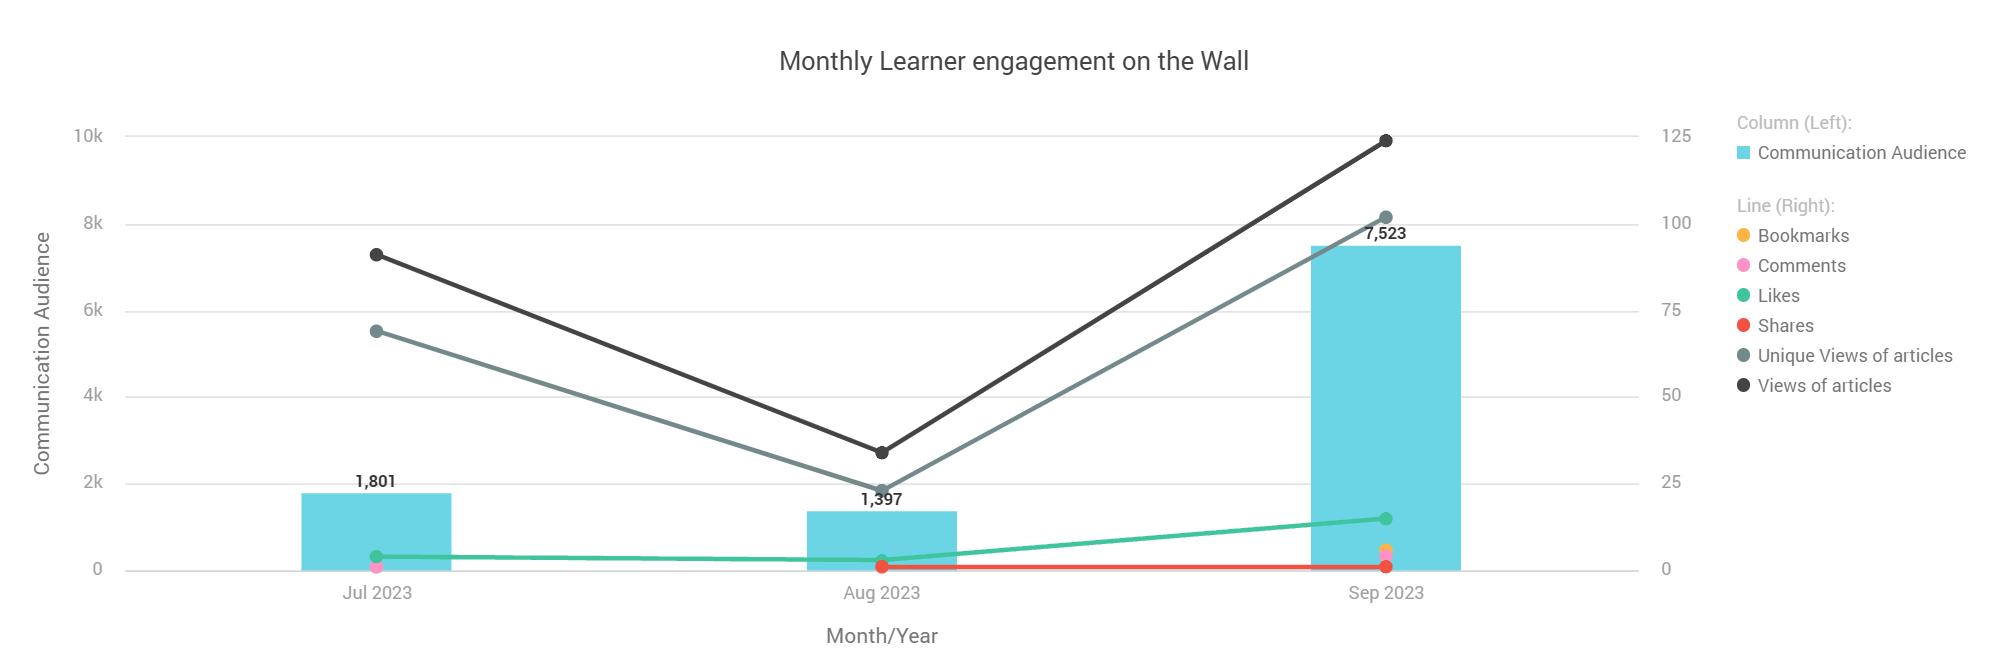 Monthly learner engagement on the Wall.png